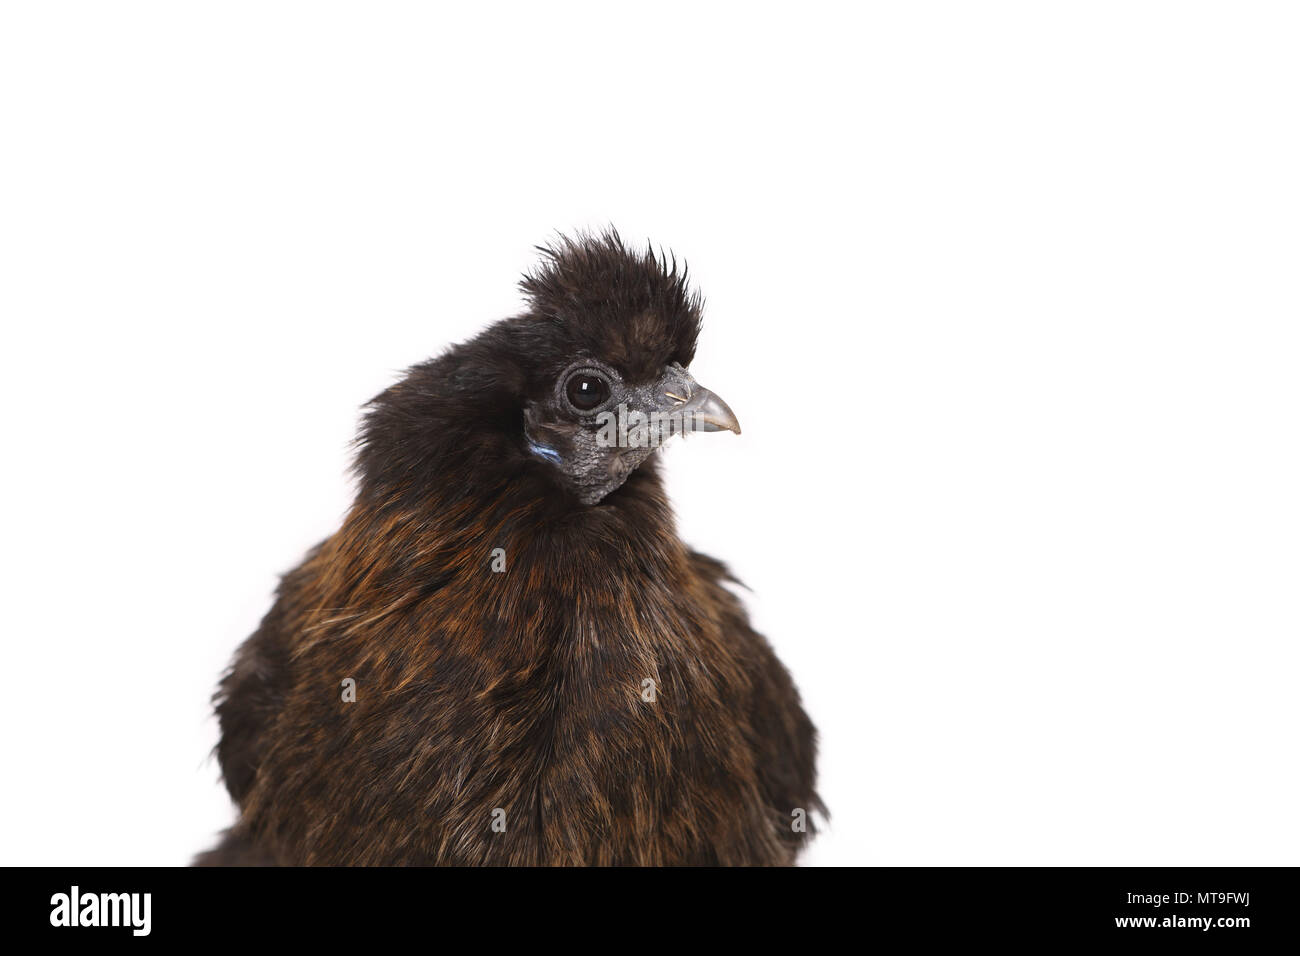 Domestic Chicken, Silkie, Silky. Portrait of adult. Studio picture against a white background Stock Photo